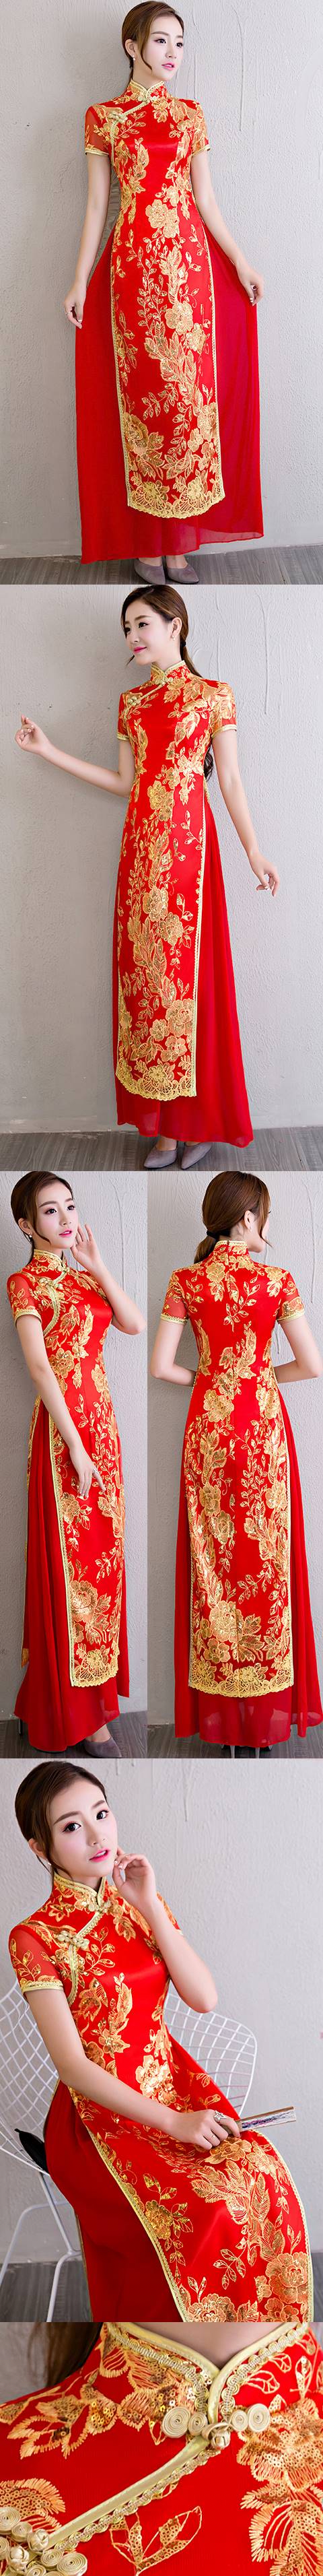 Magnificent Vietnamese National Outfit - Aodai (RM)